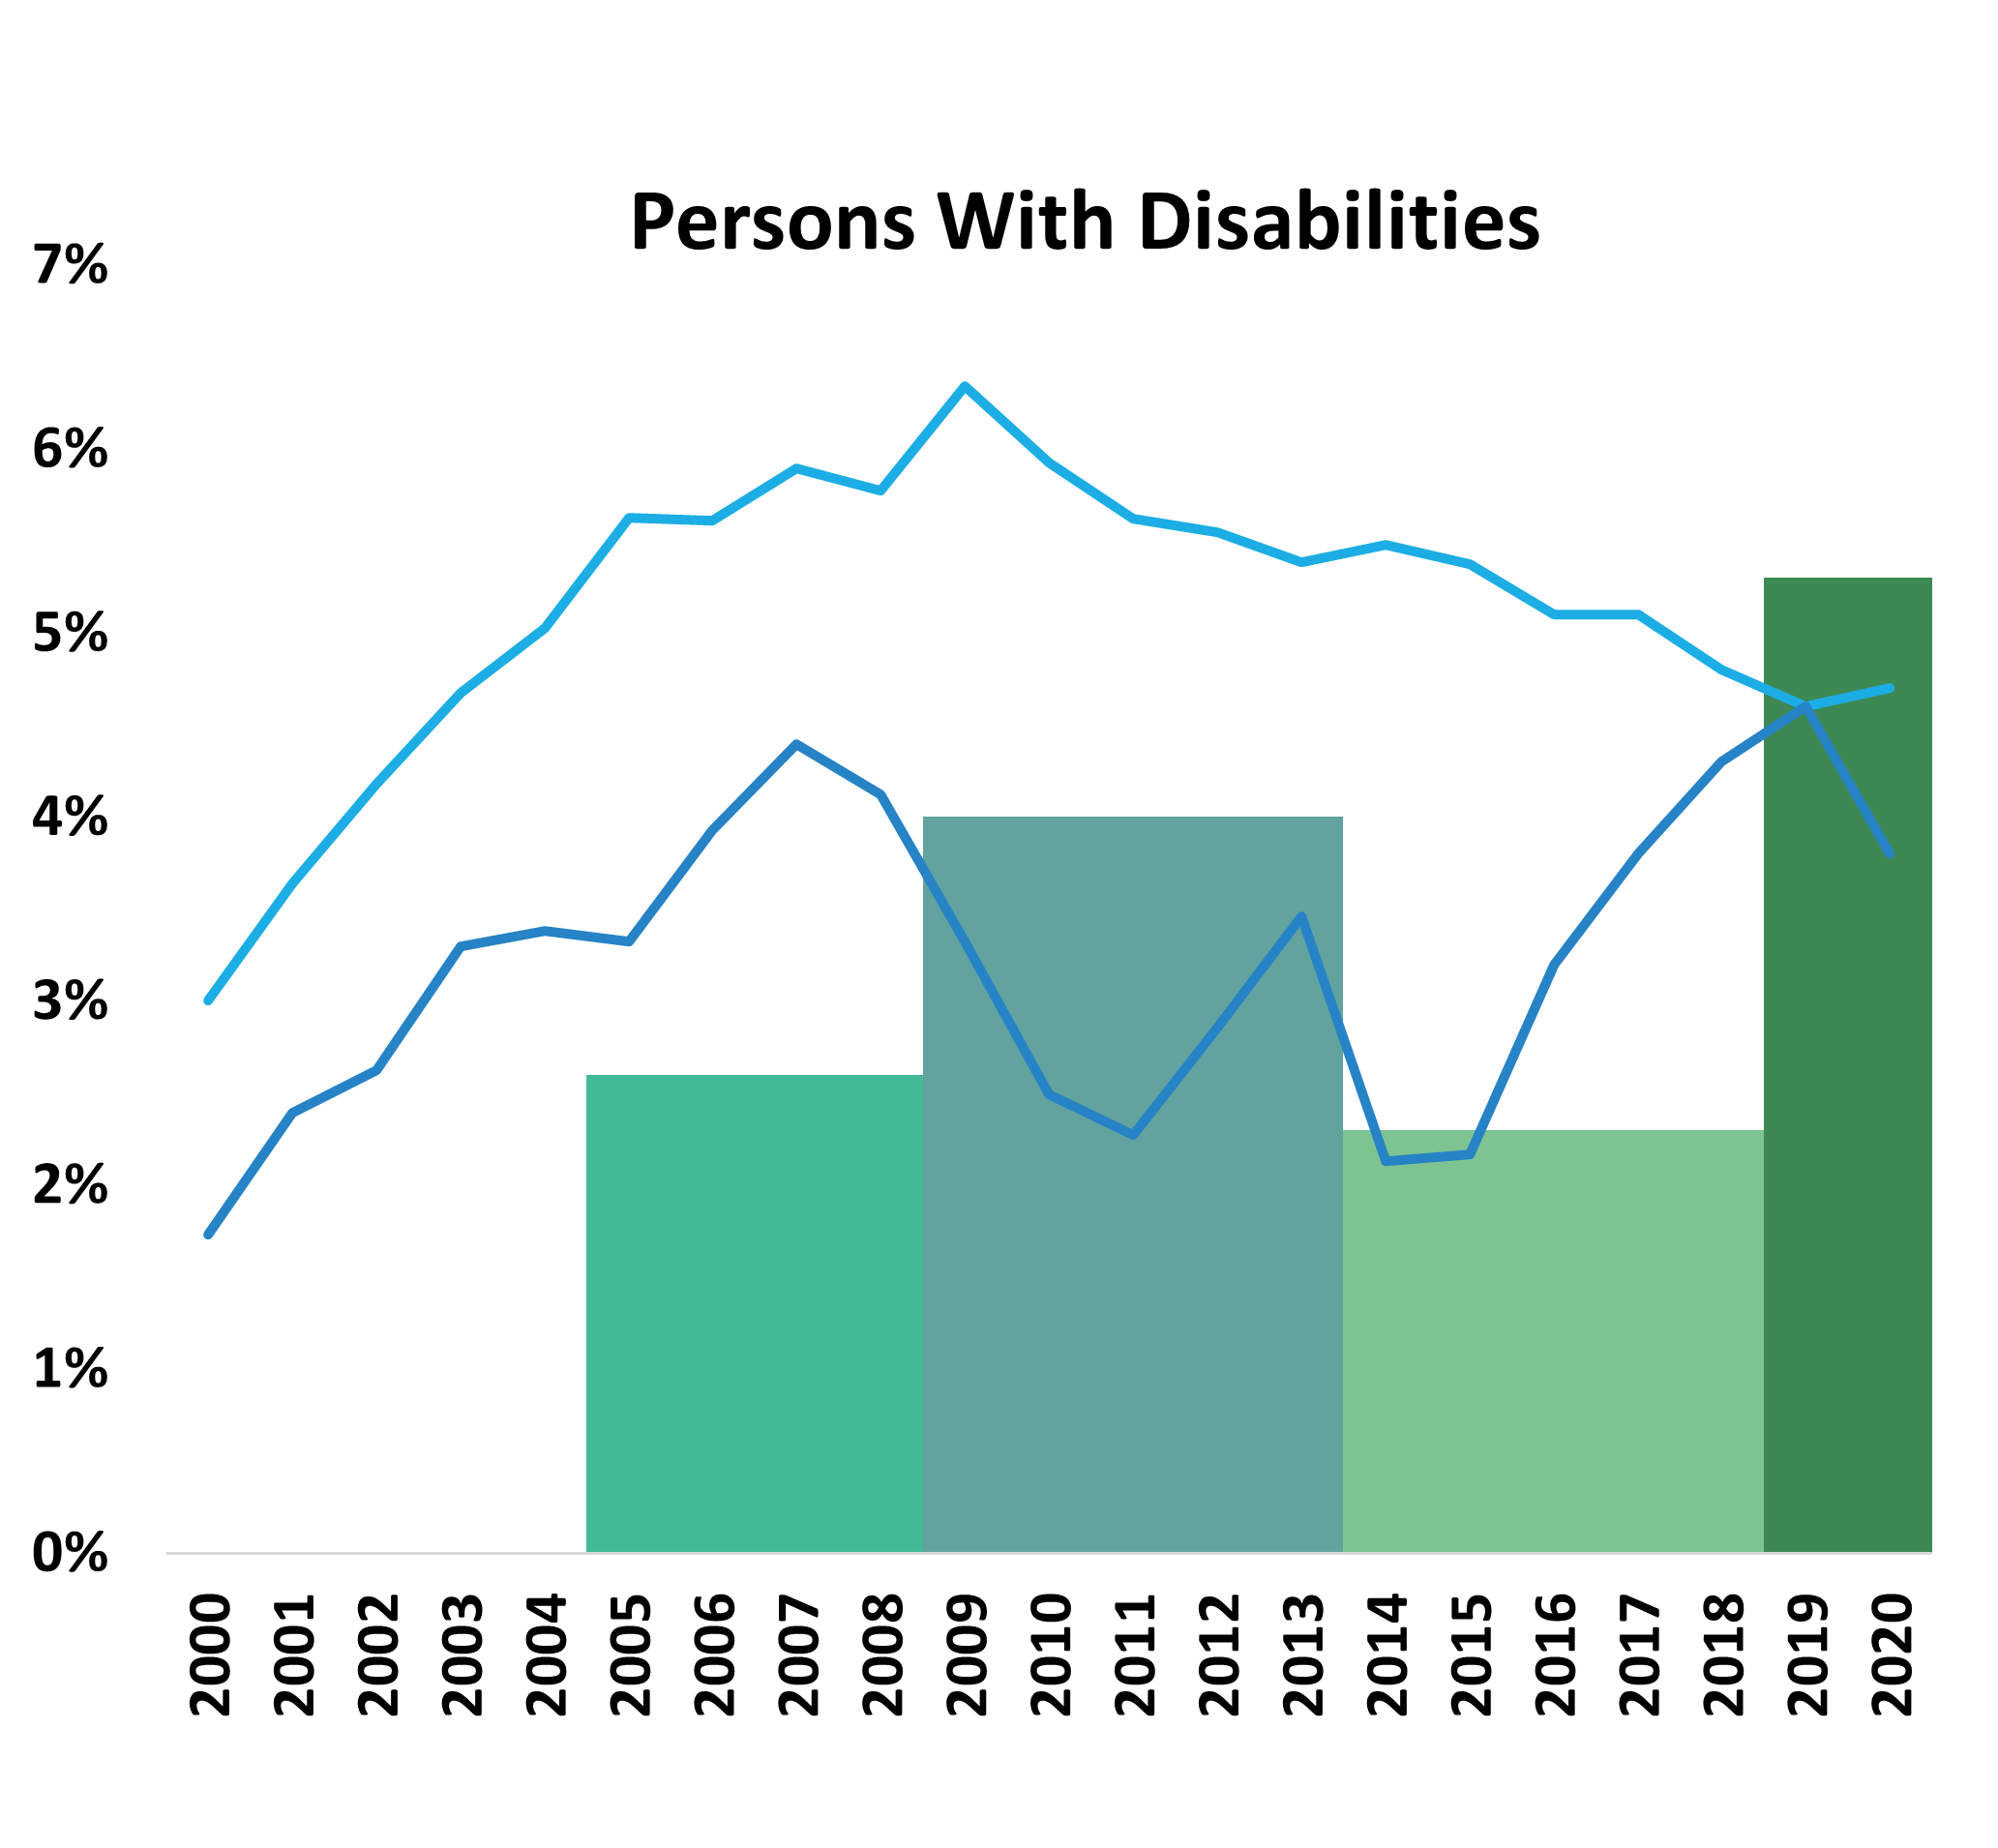 Persons With Disabilities. Text version below: